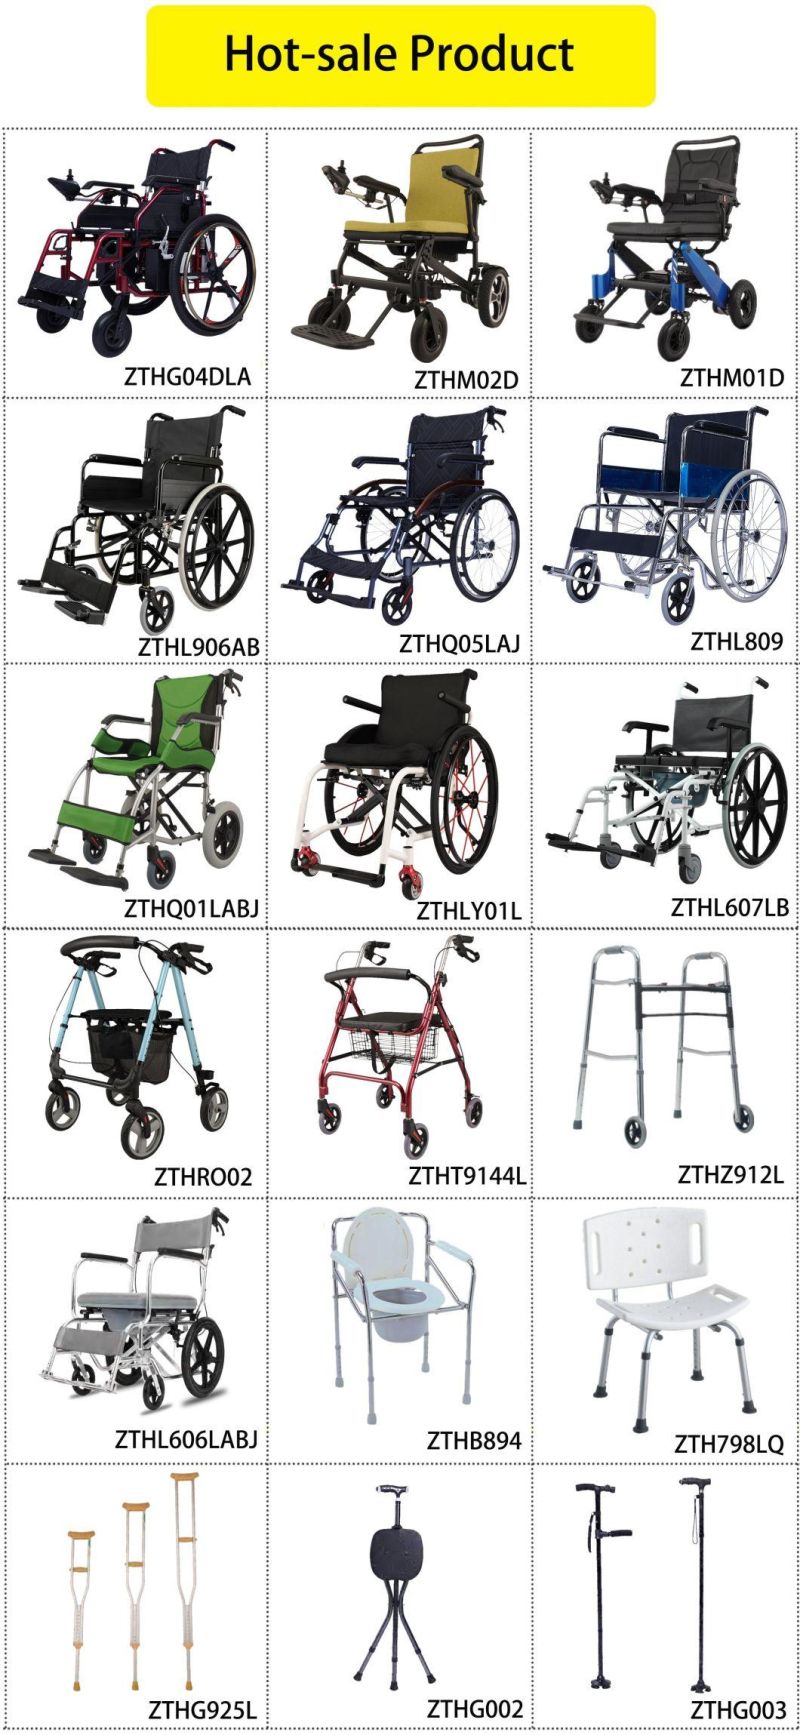 with PVC Soft Seat Board Elderly People Safety Outdoor Steel Walker Frame 2 Wheels Easy Carry Lightweight Height Adjust Walking Aid